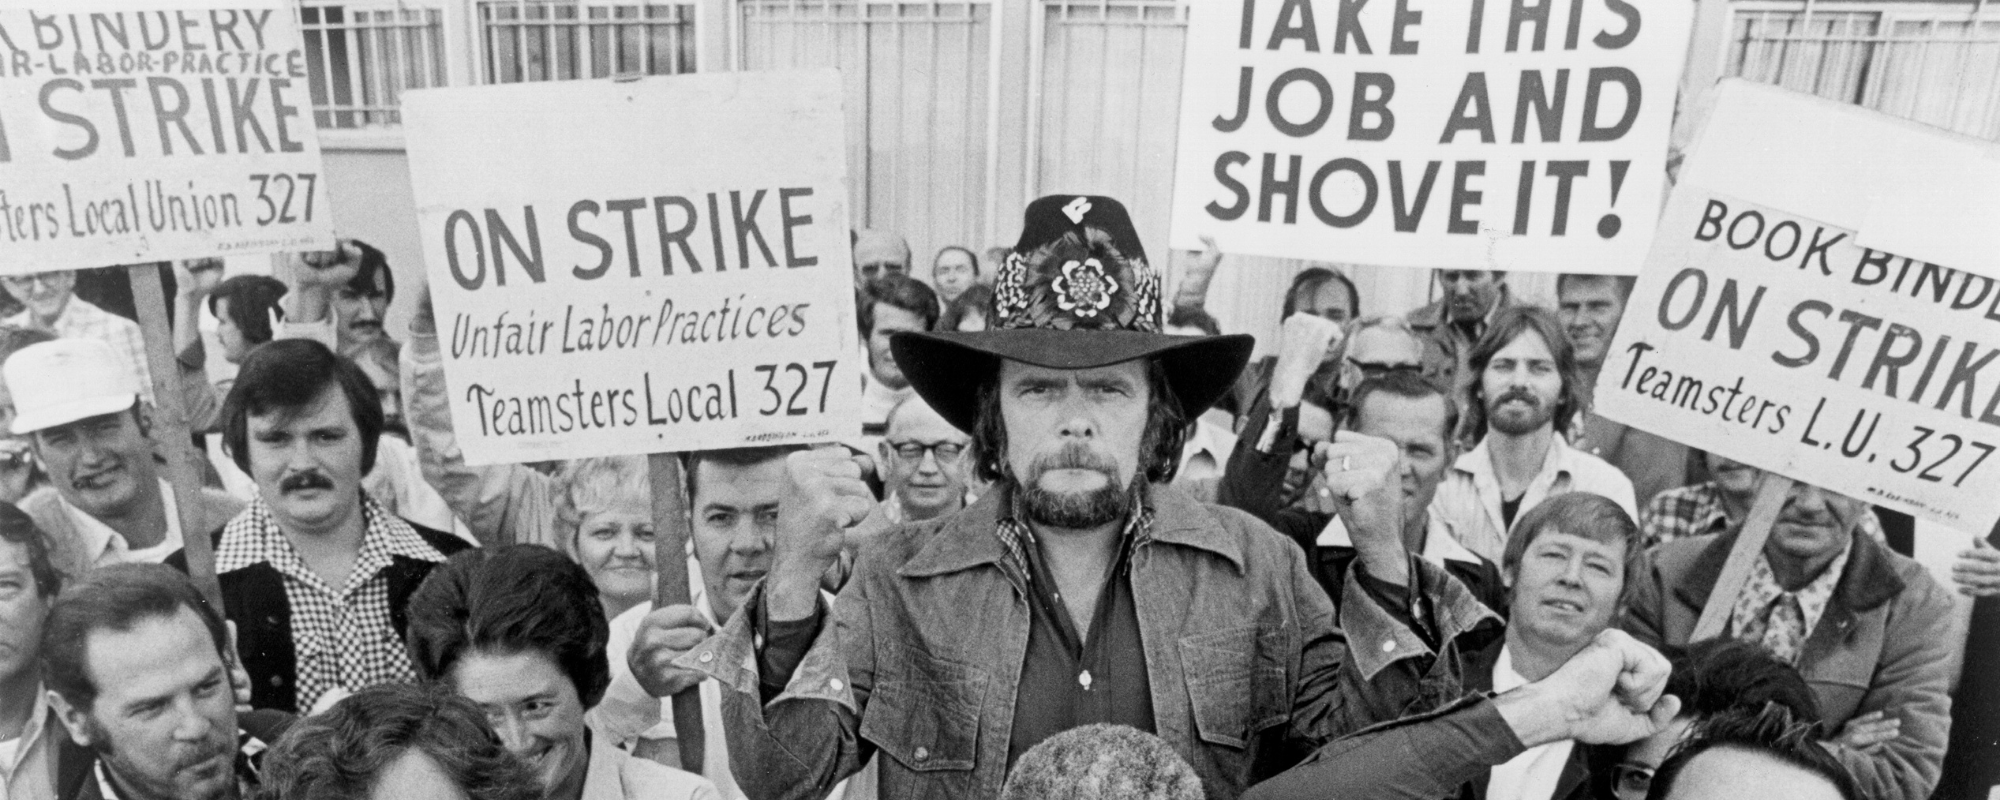 The Defiant Meaning Behind Johnny Paycheck’s “Take This Job and Shove It,” an ’80s Pop Culture Phenomenon